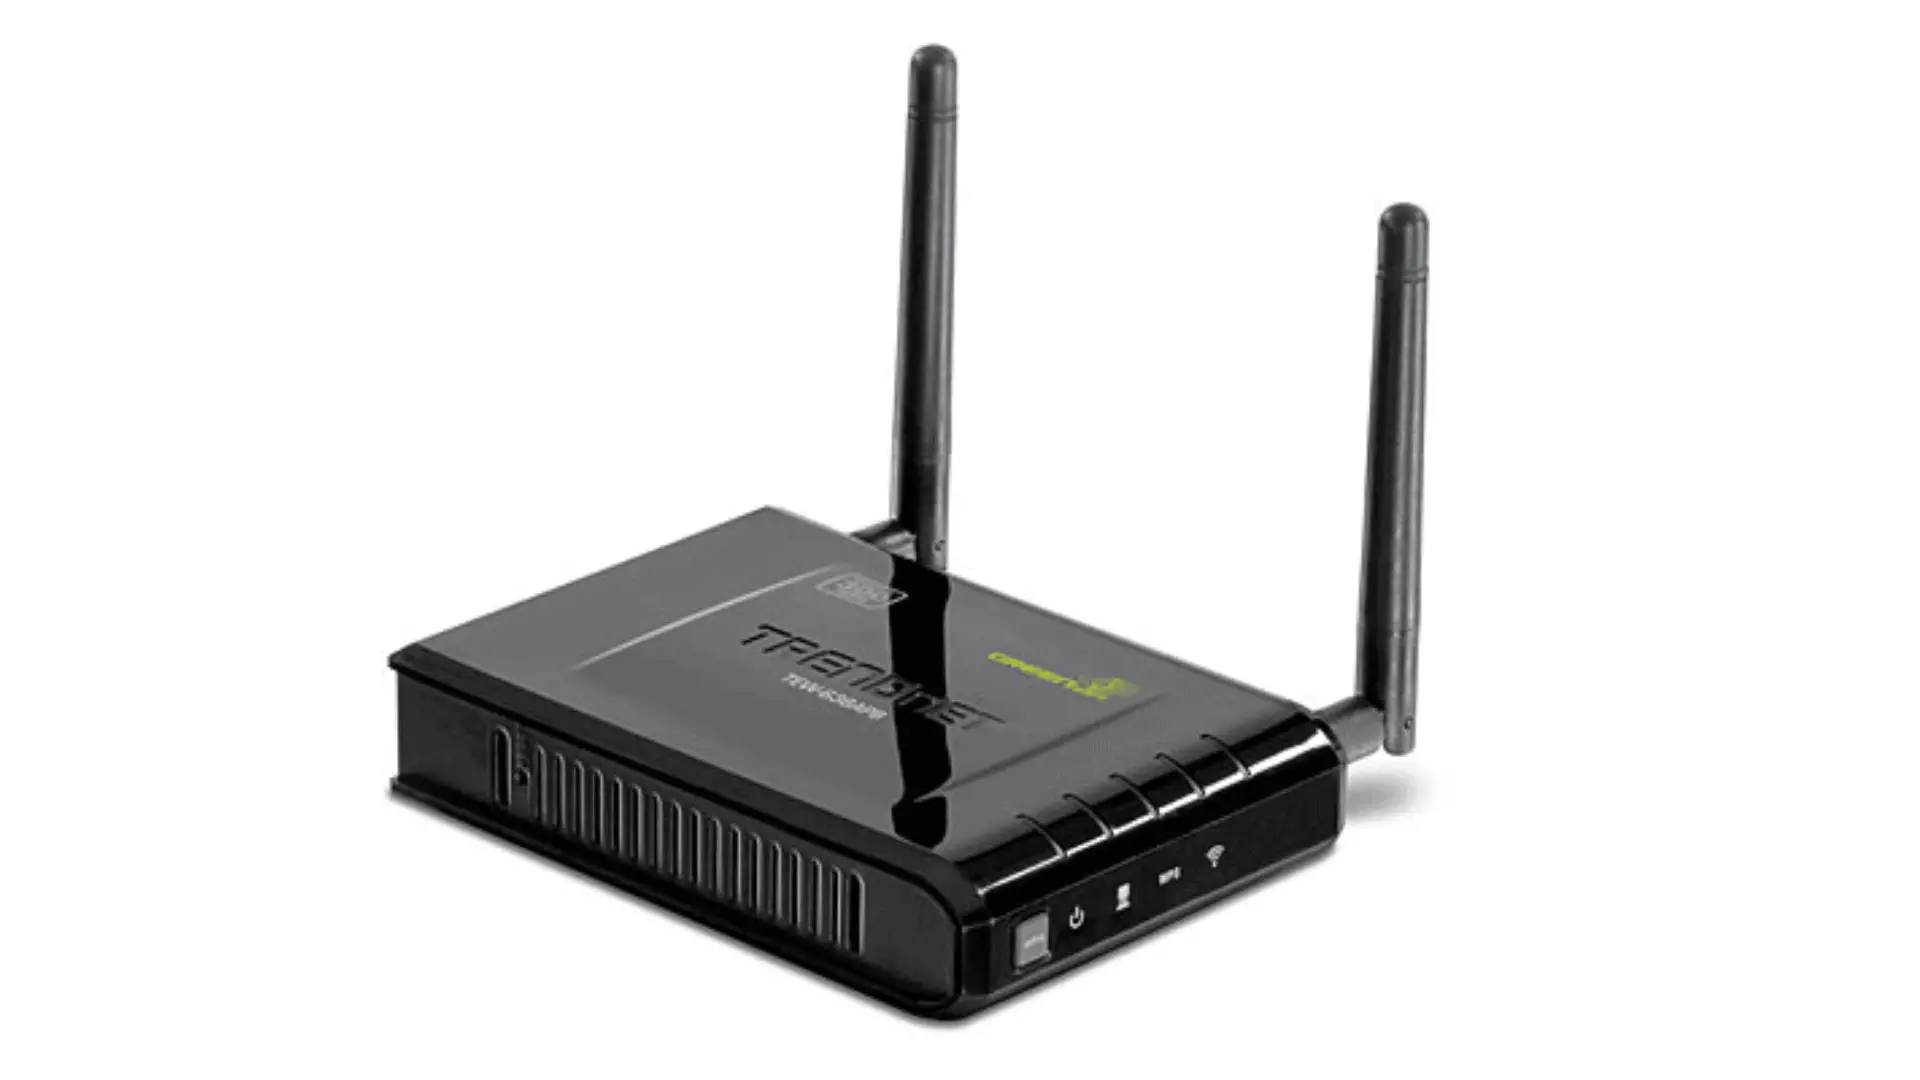 TRENDnet TEW-638APB Router with two antennas and five LED status indicators.